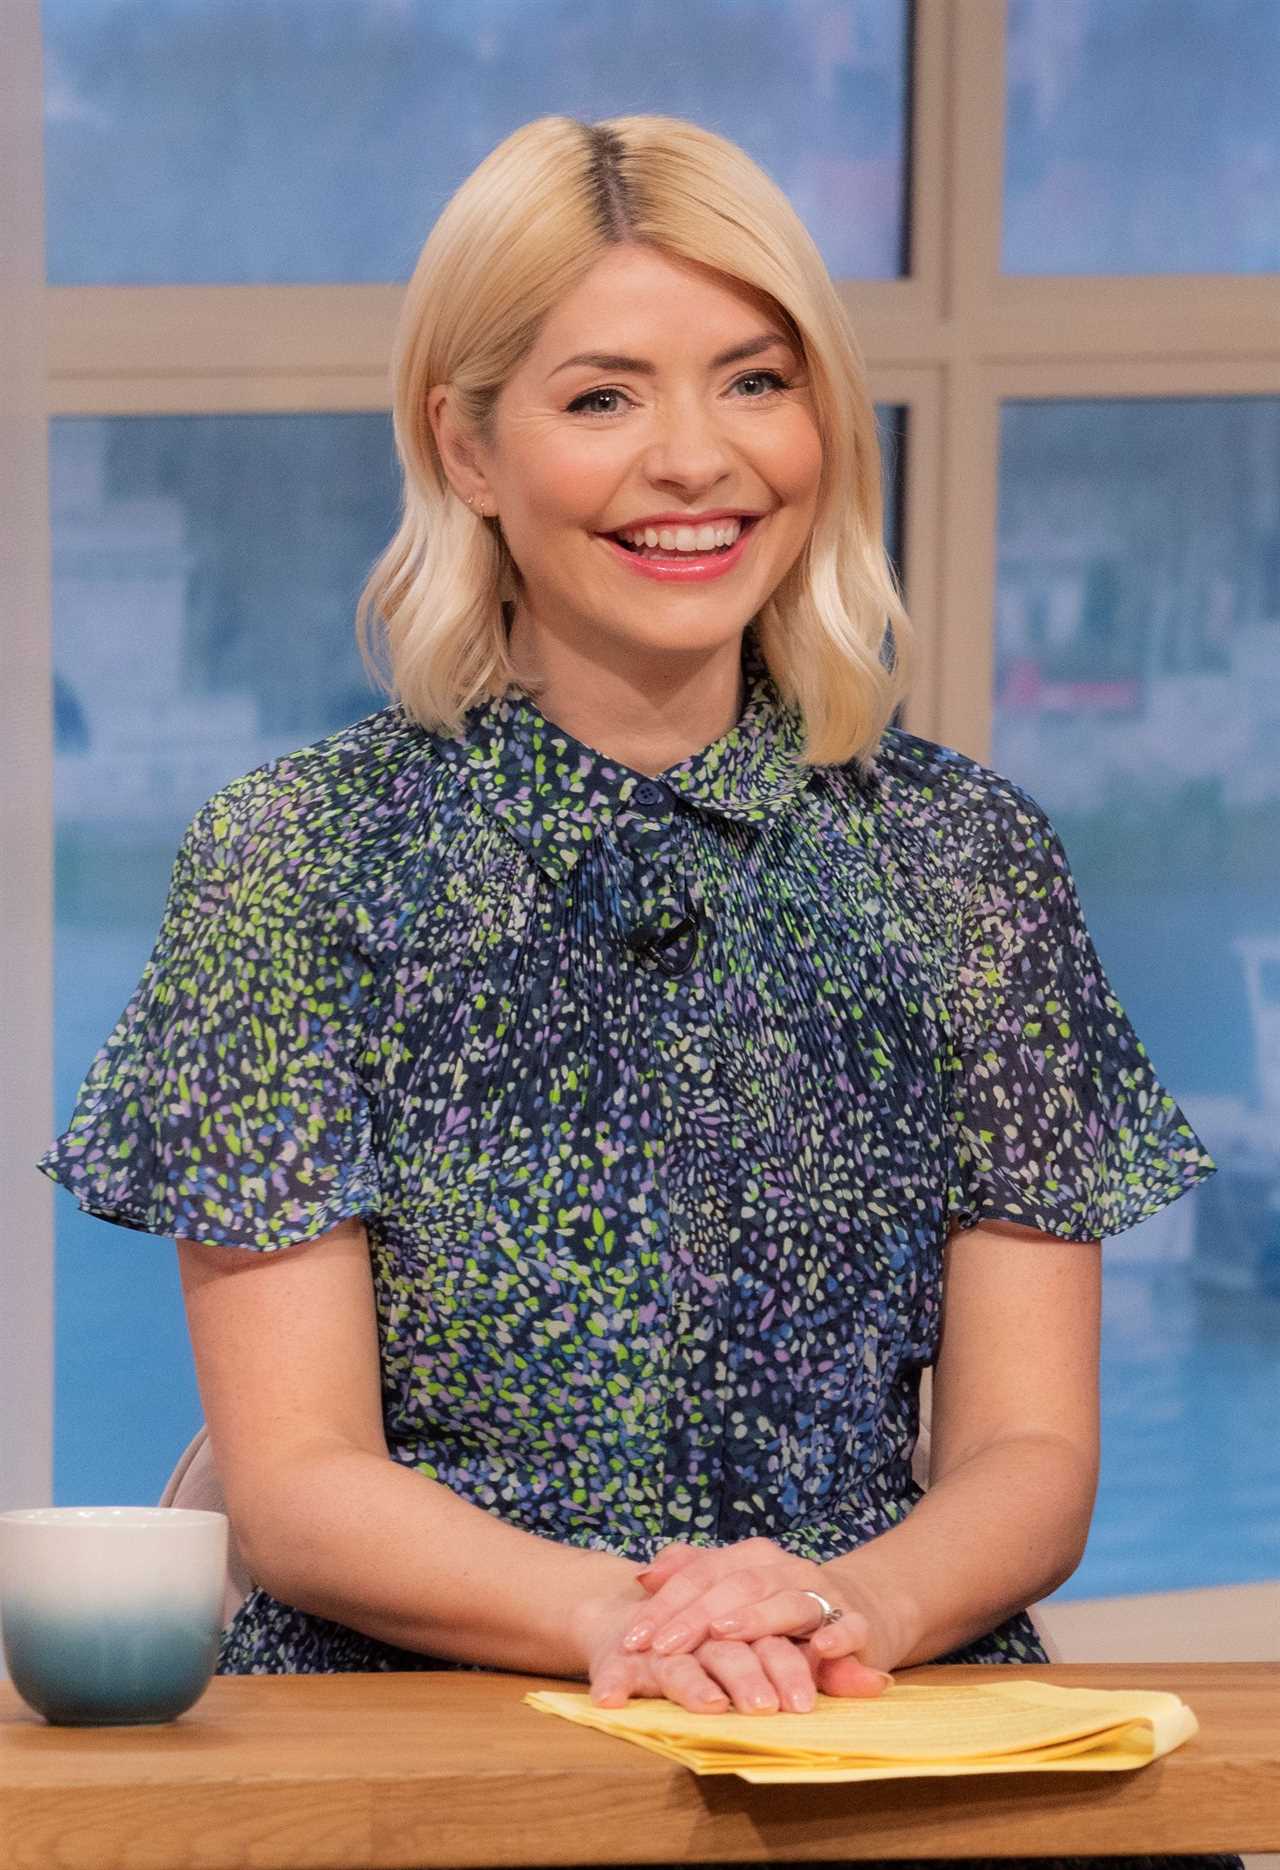 Holly Willoughby shares rare snap of her kids visiting her on This Morning’s set as she announces break from the show